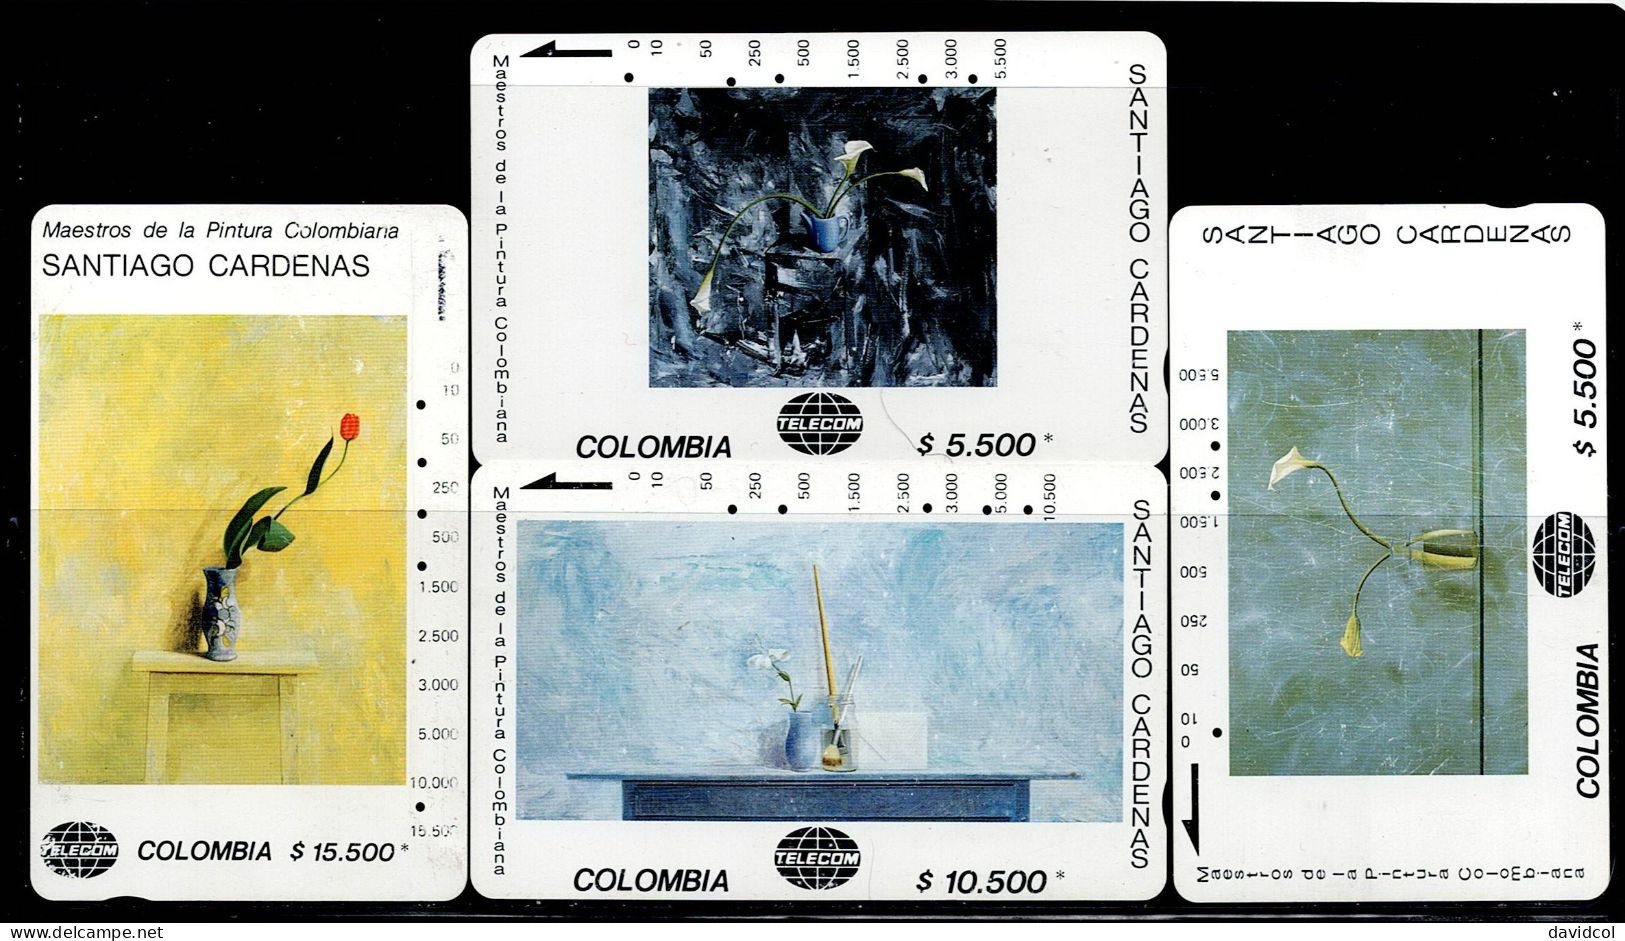 TT9-COLOMBIA TAMURA CARDS 1990's - USED SET MASTER PAINTERS - SANTIAGO CARDENAS - Colombia